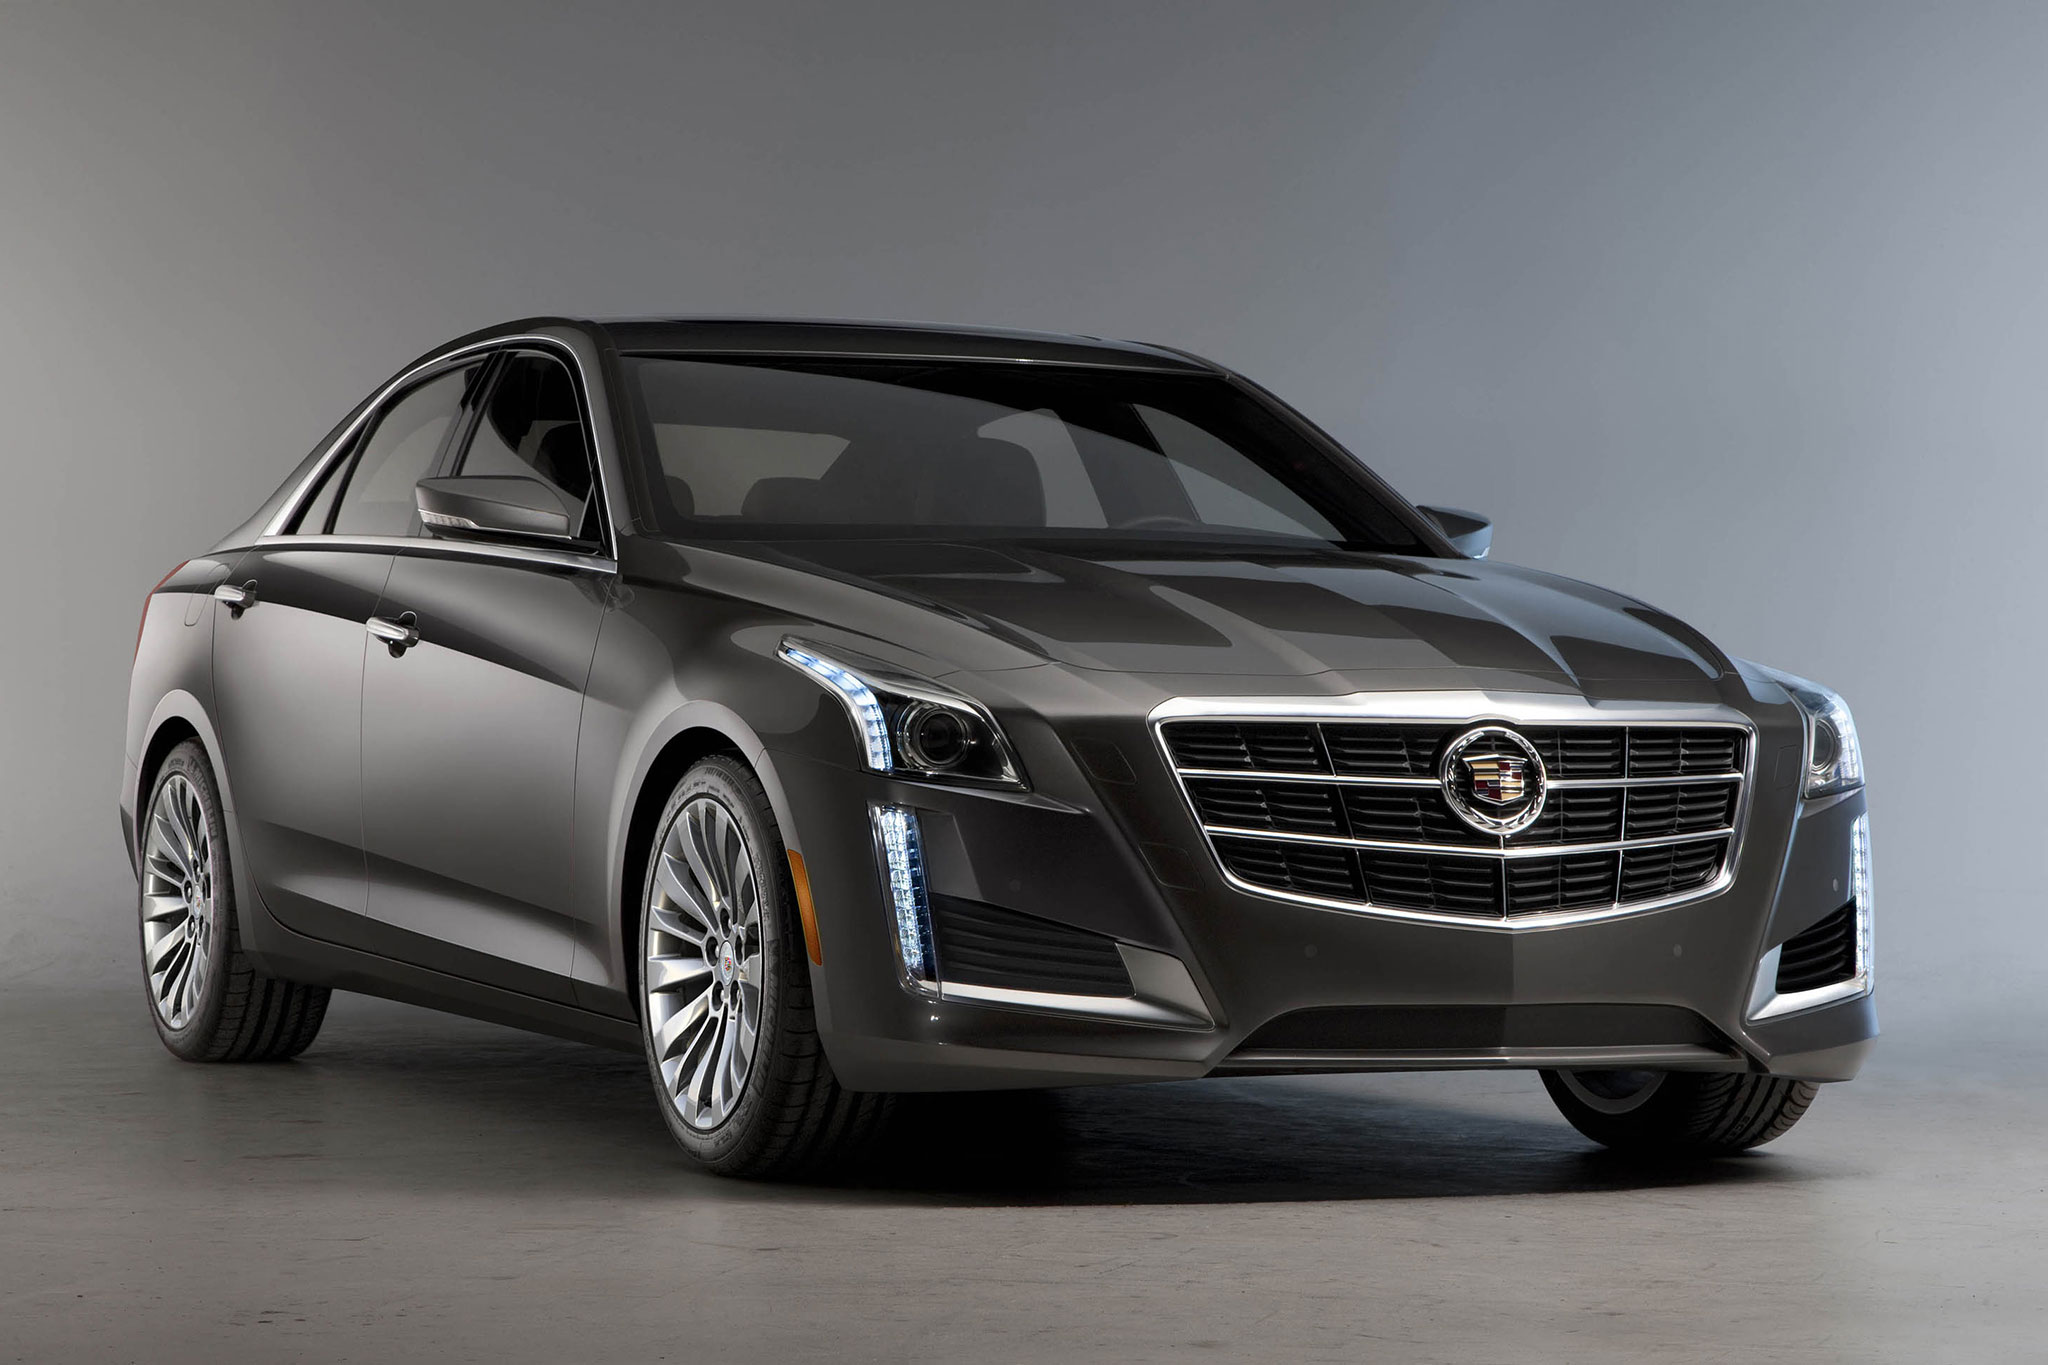 Nice Images Collection: Cadillac CTS Desktop Wallpapers